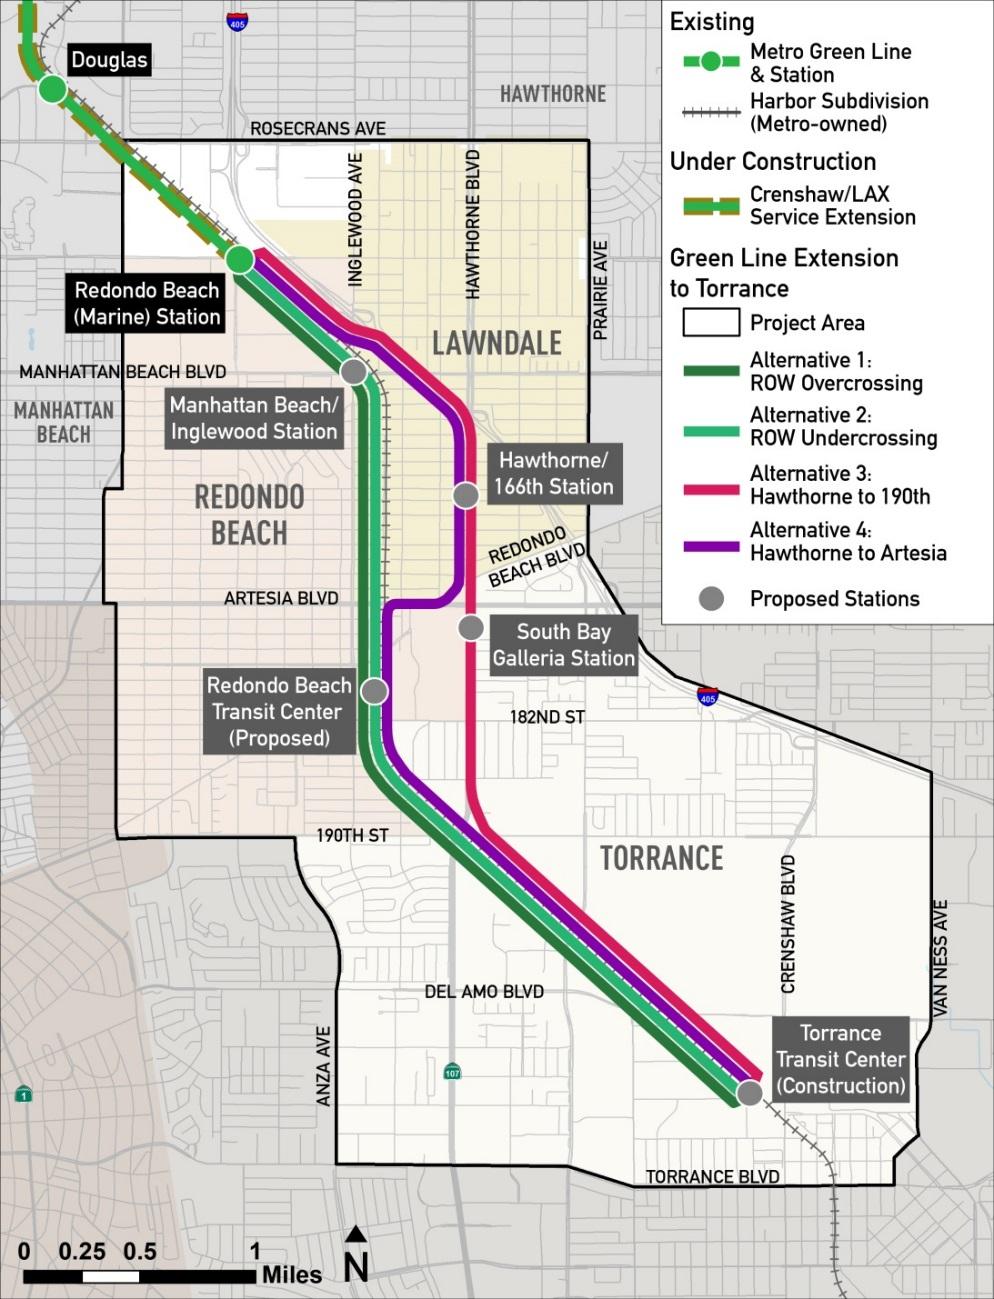 Green Line Extension to Torrance Project Overview 4.